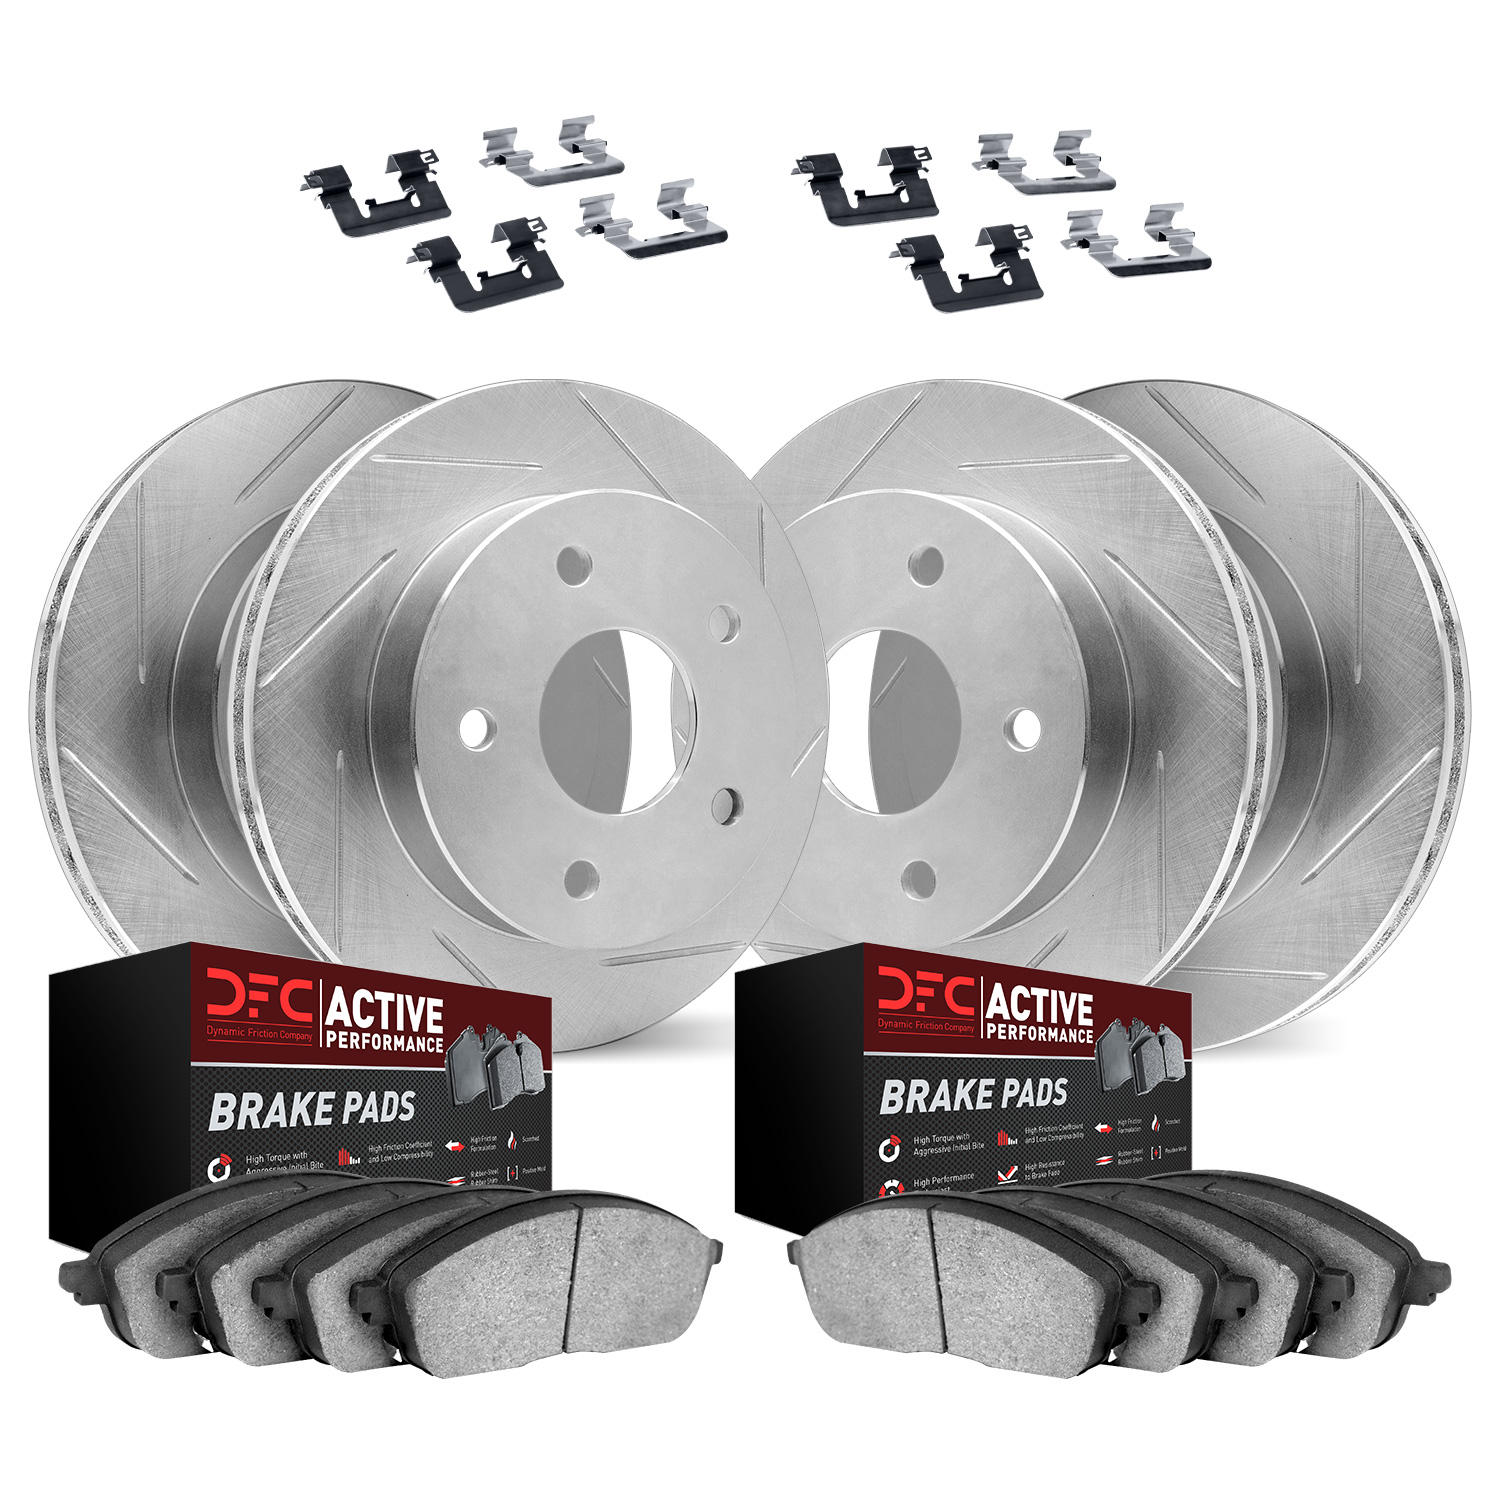 2714-31027 Geoperformance Slotted Brake Rotors with Active Performance Pads Kits & Hardware, 1995-2002 BMW, Position: Front and